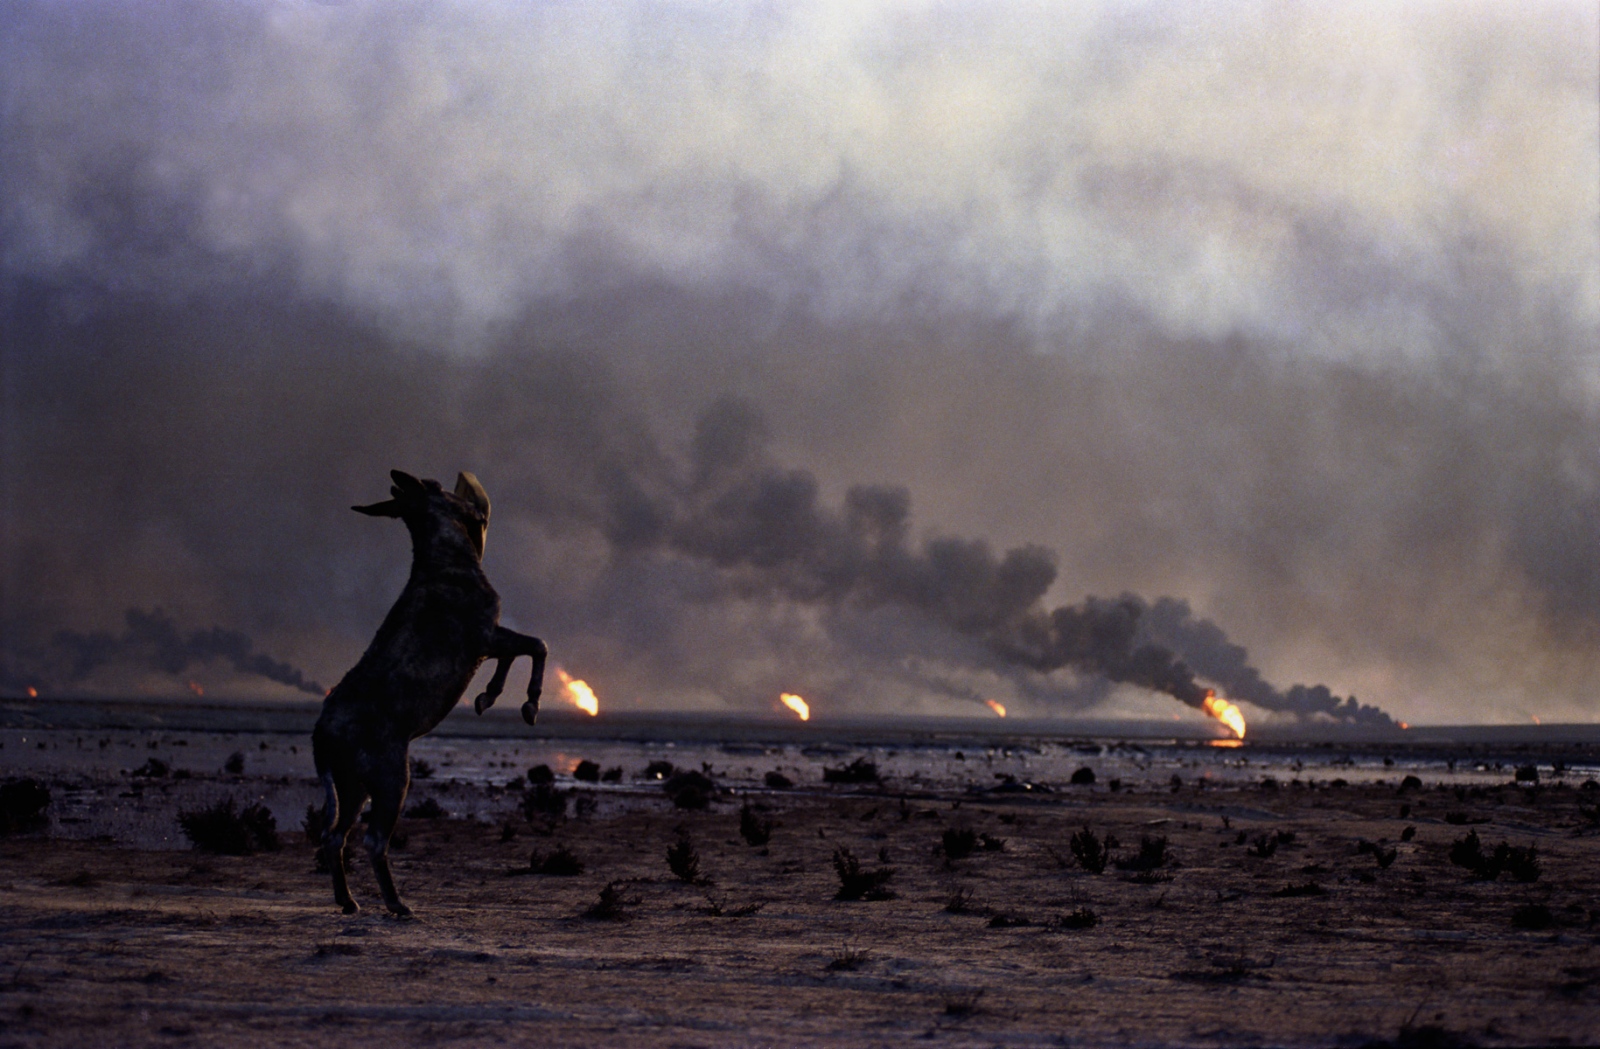 Oil fires set by retreating Iraqi troops raged throughout Kuwait at the end of the Gulf War in 1991. In the al-Burgan oil fields just south of...